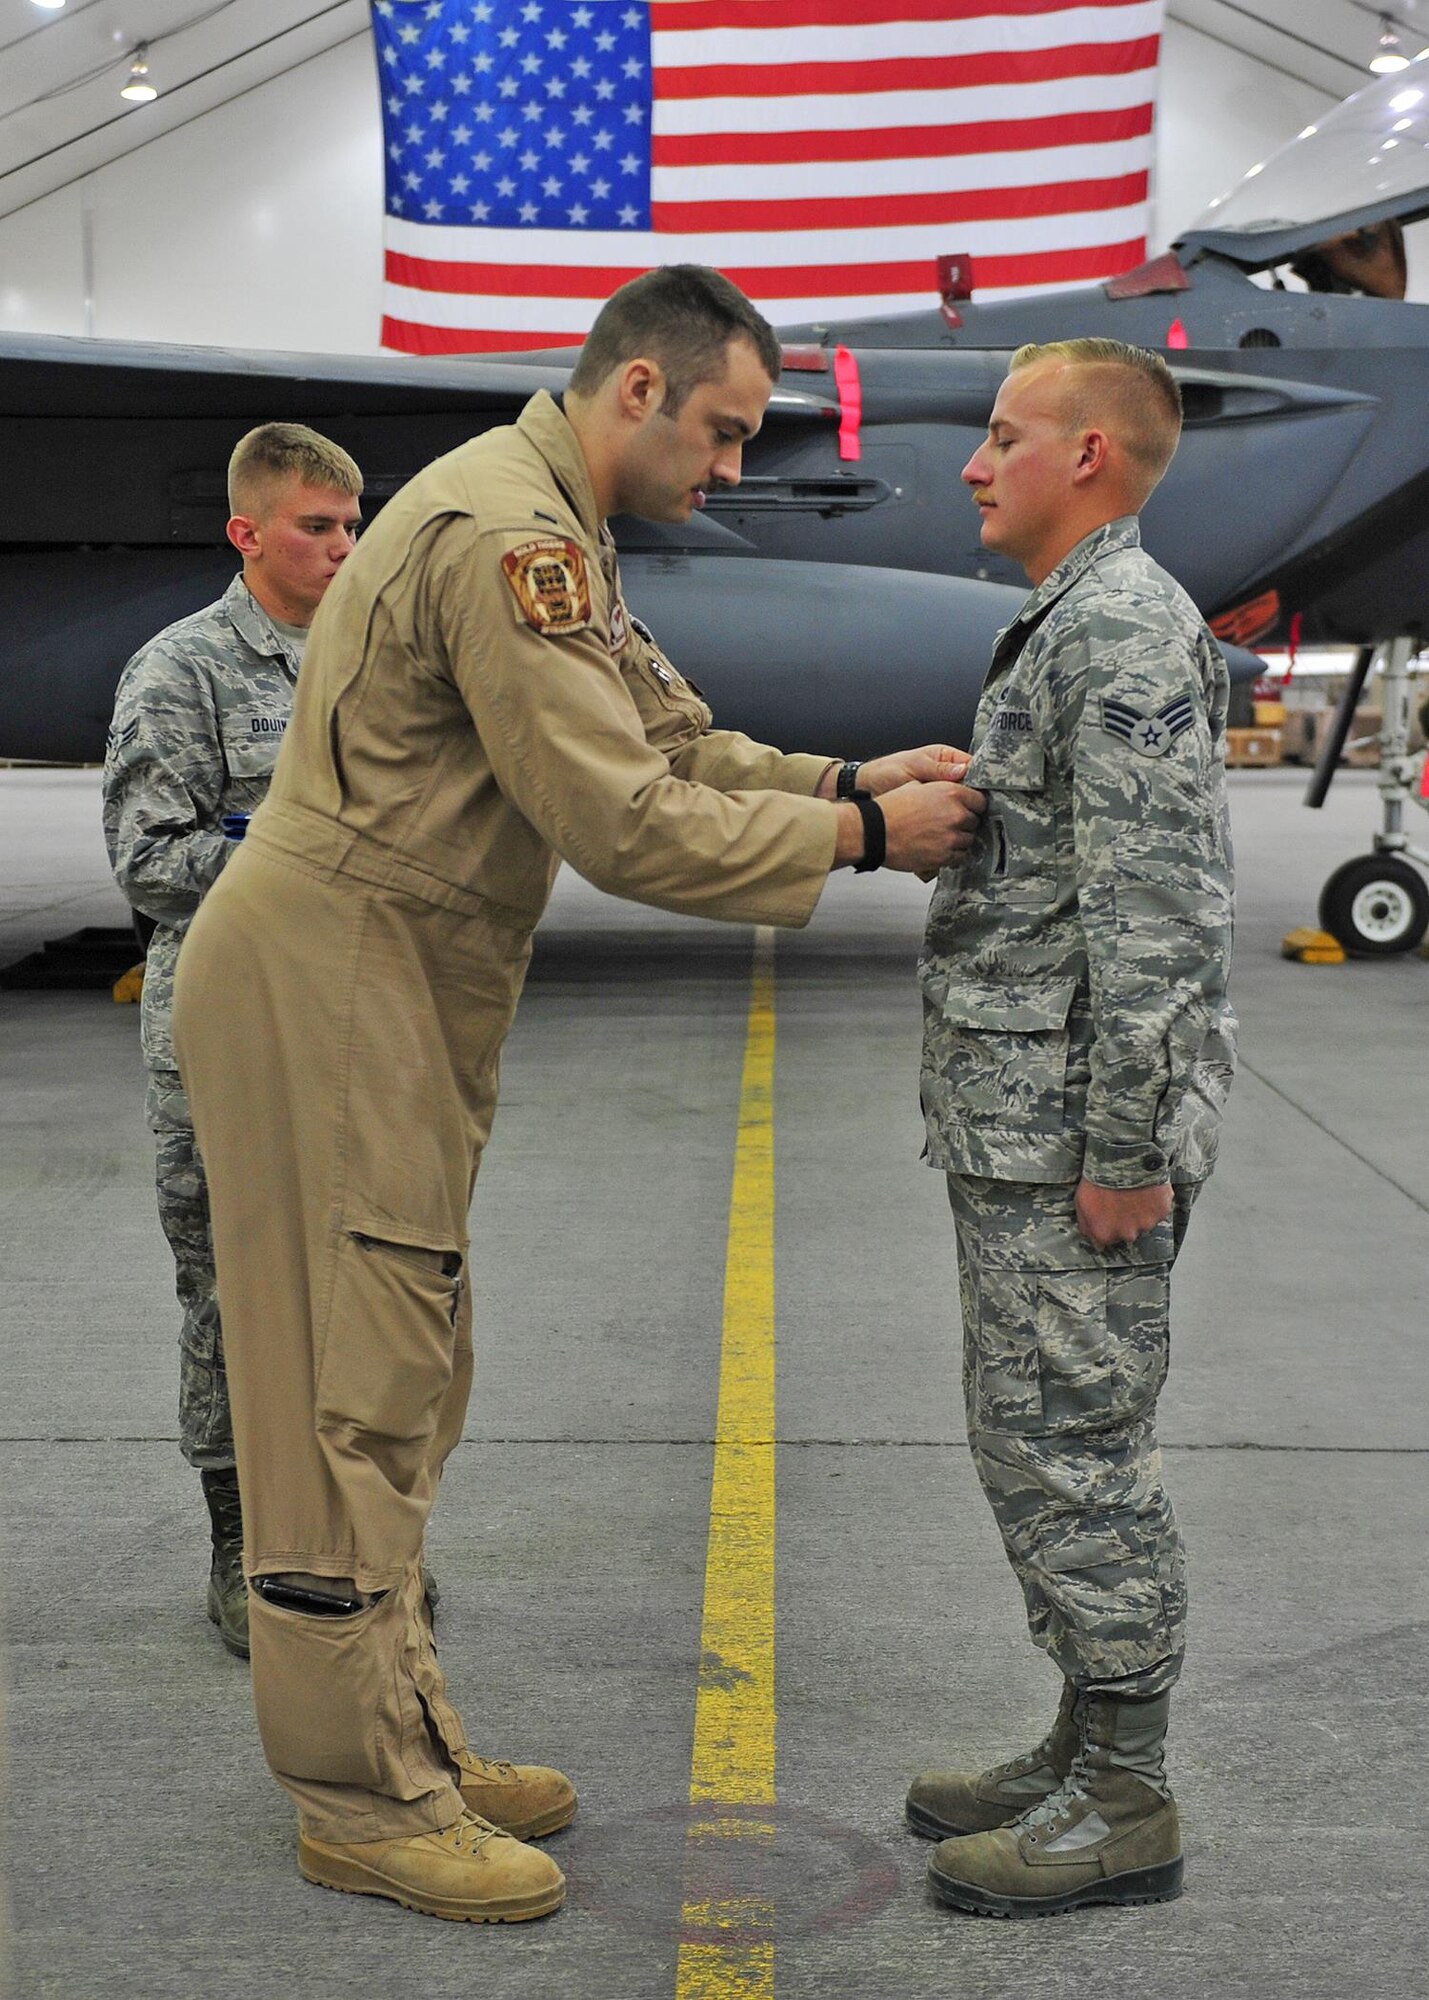 U.S. Air Force 1st Lt. Nicholas, F-15E Strike Eagle fighter pilot assigned to the 391st Expeditionary Fighter Squadron, pins an Air Force Commendation Medal on Senior Airman Nash Camden, a 380th Expeditionary Aircraft Maintenance Squadron weapons load crew member, during an awards ceremony at an undisclosed location in Southwest Asia, Feb. 16, 2016. Nicholas is one of two aircrew members who were inside a taxiing F-15 when a hydraulic fluid leak on the aircraft’s hot brakes set it afire Dec. 2, 2015. (U.S. Air Force photo by Staff Sgt. Kentavist P. Brackin/Released)